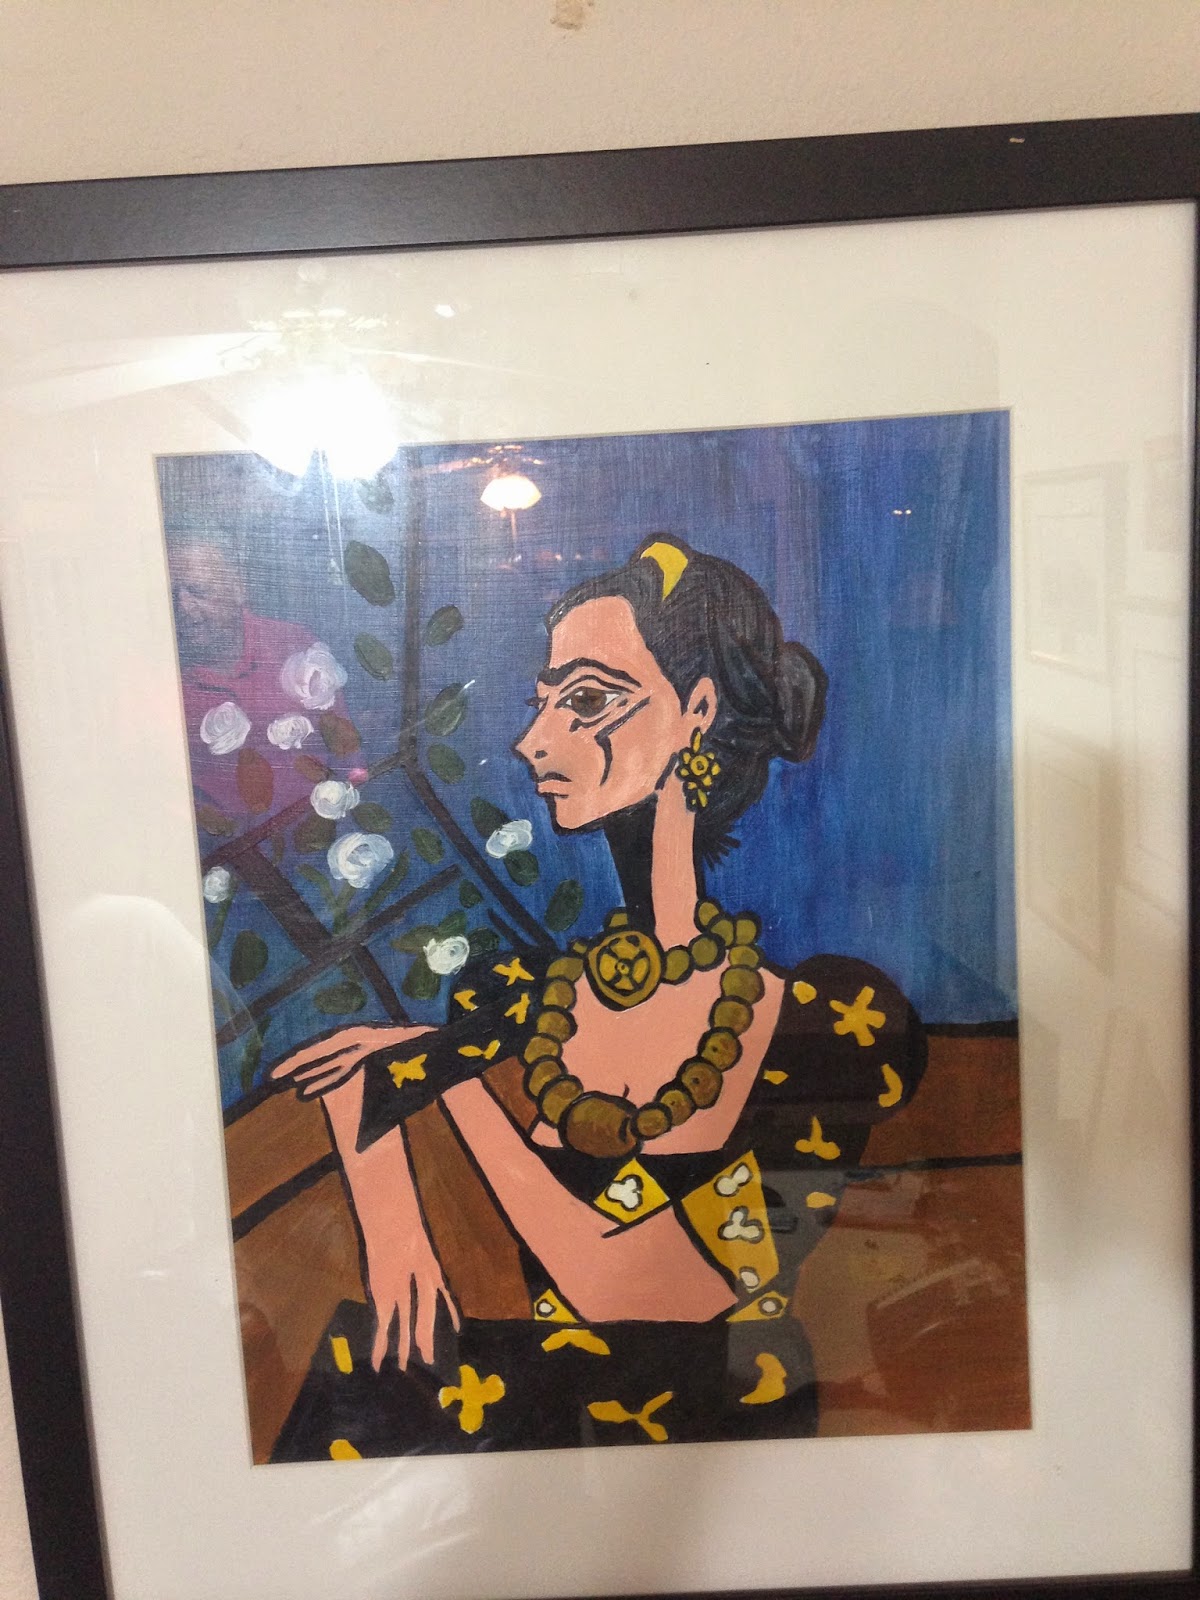 Frida Kahlo in a Picasso Style. Oil on wood, 1980 by F. Lennox Campello